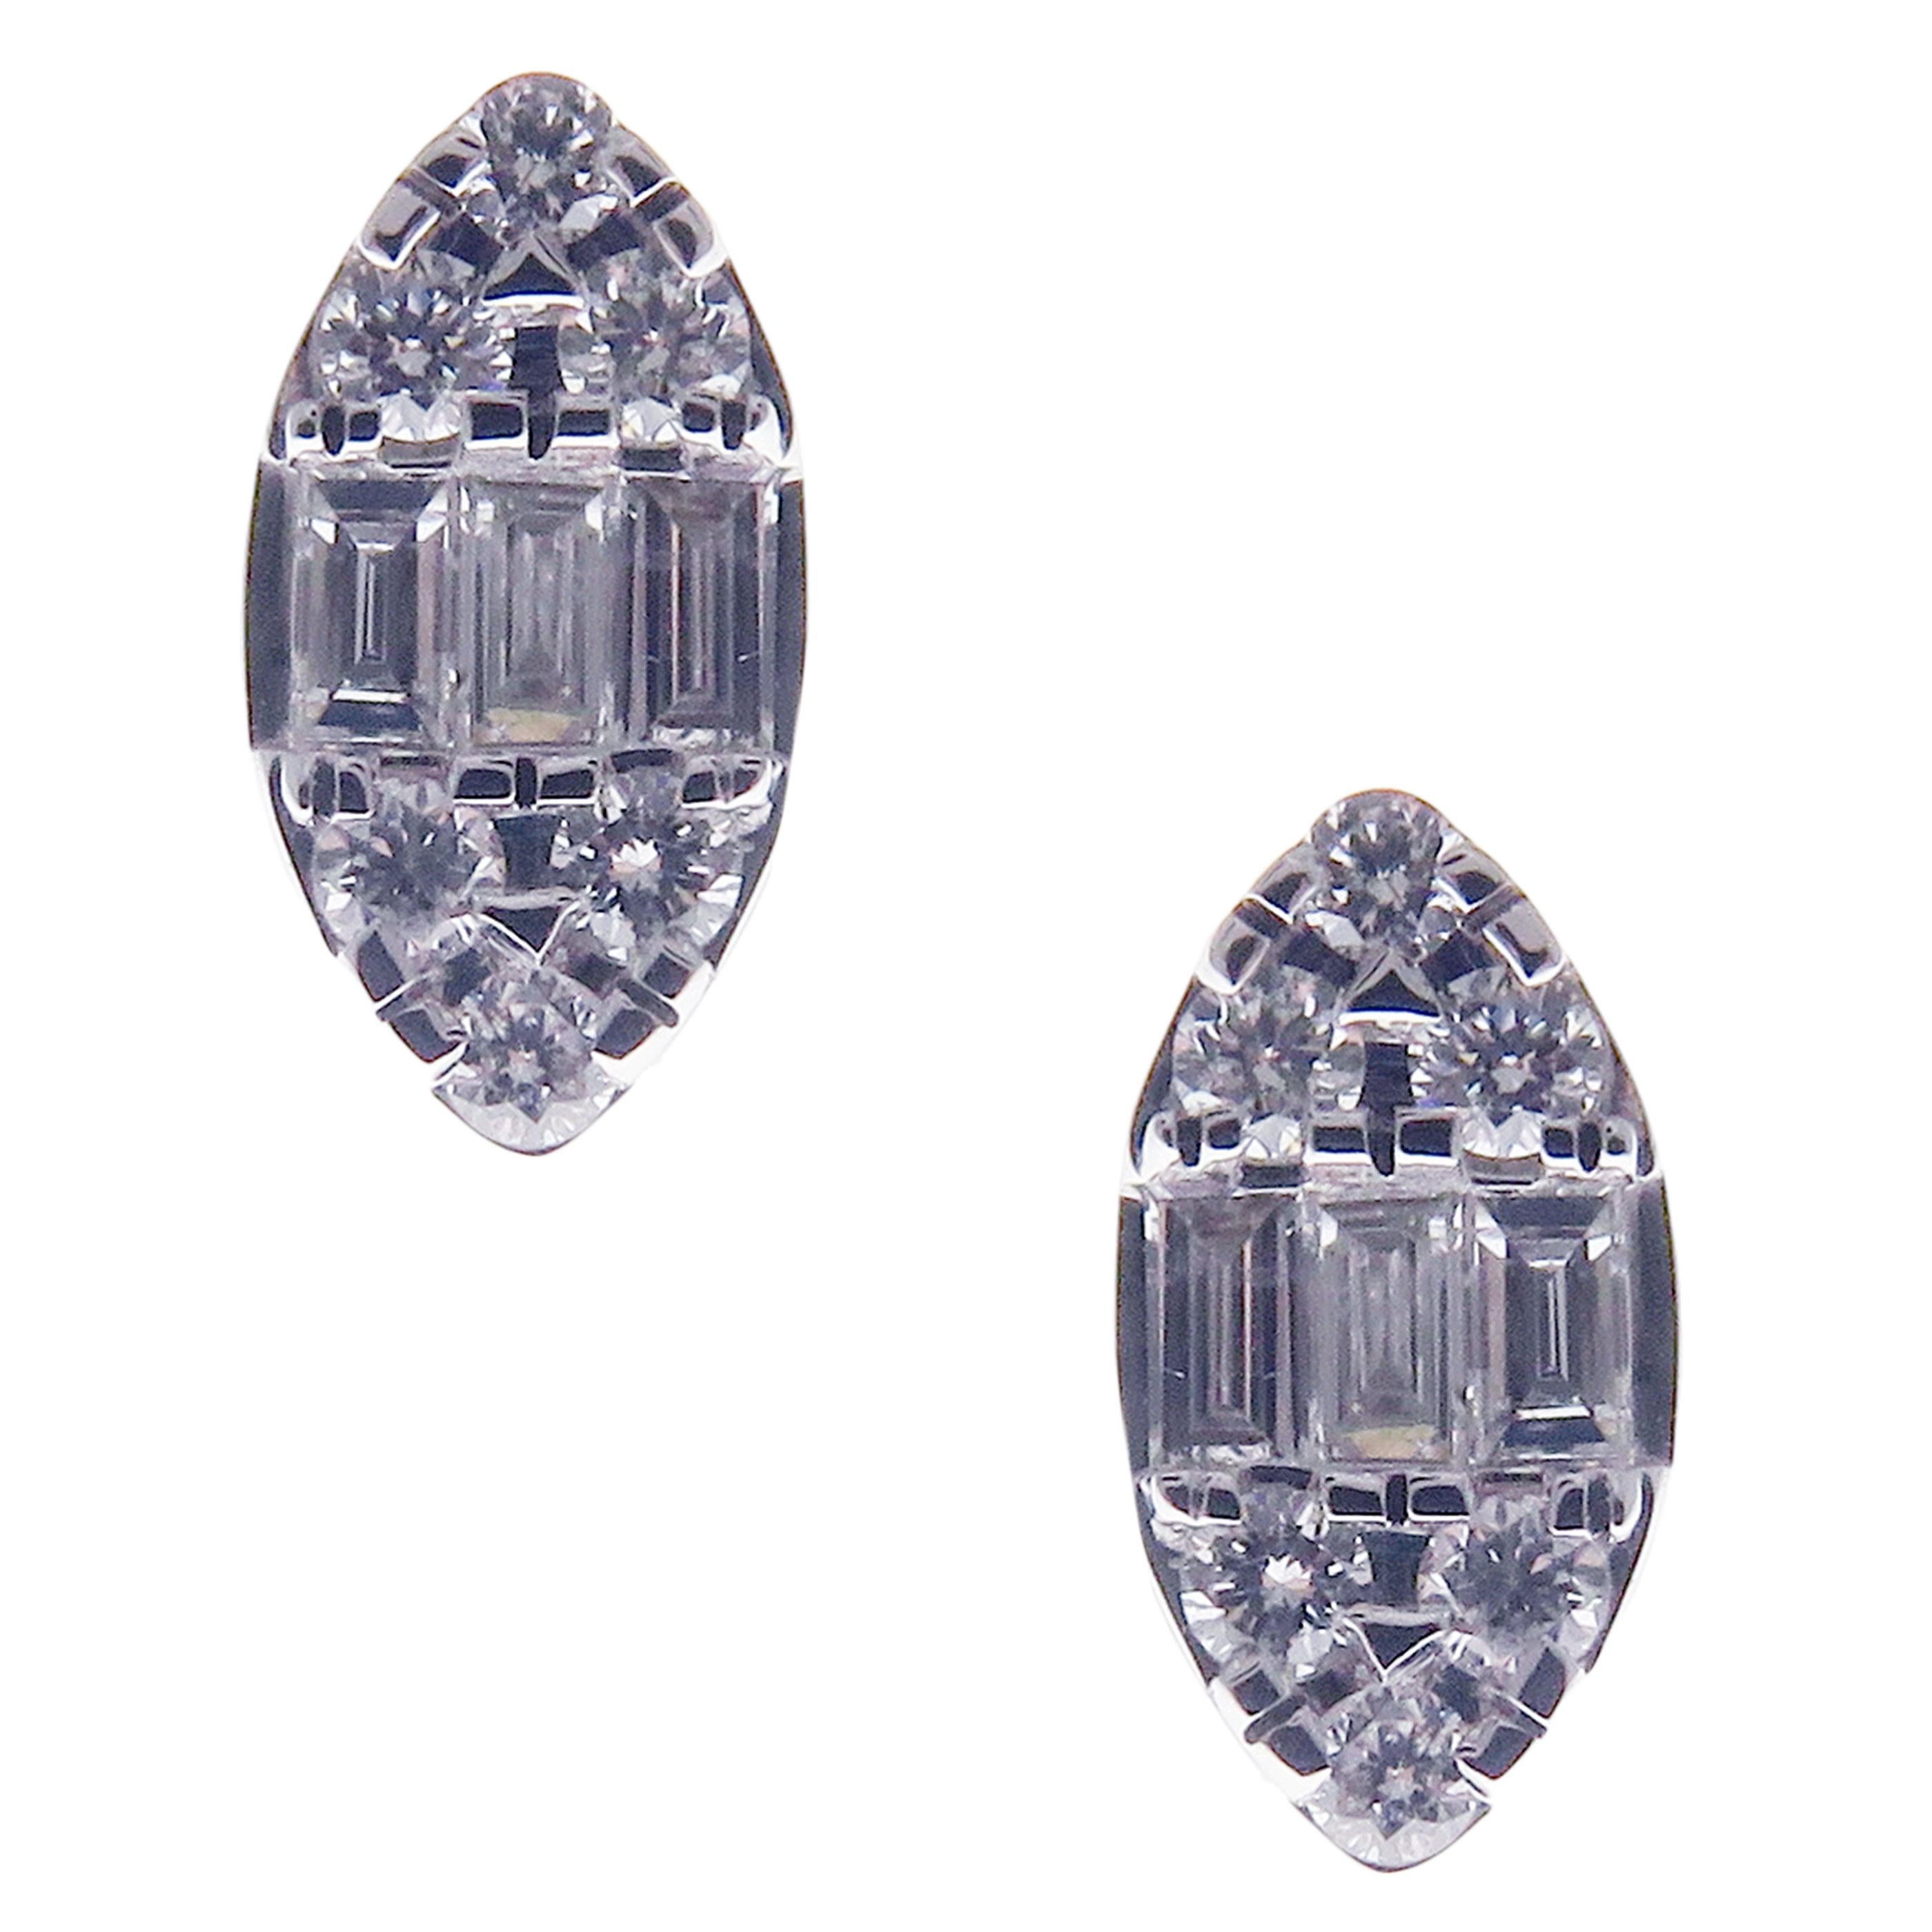 This round and baguette combination diamond illusion marquise-shape stud earring is crafted in 18-karat white gold, featuring 12 round white diamonds totaling of 0.10 carats and 6 baguette white diamonds totaling of 0.09 carats.
Approximate total